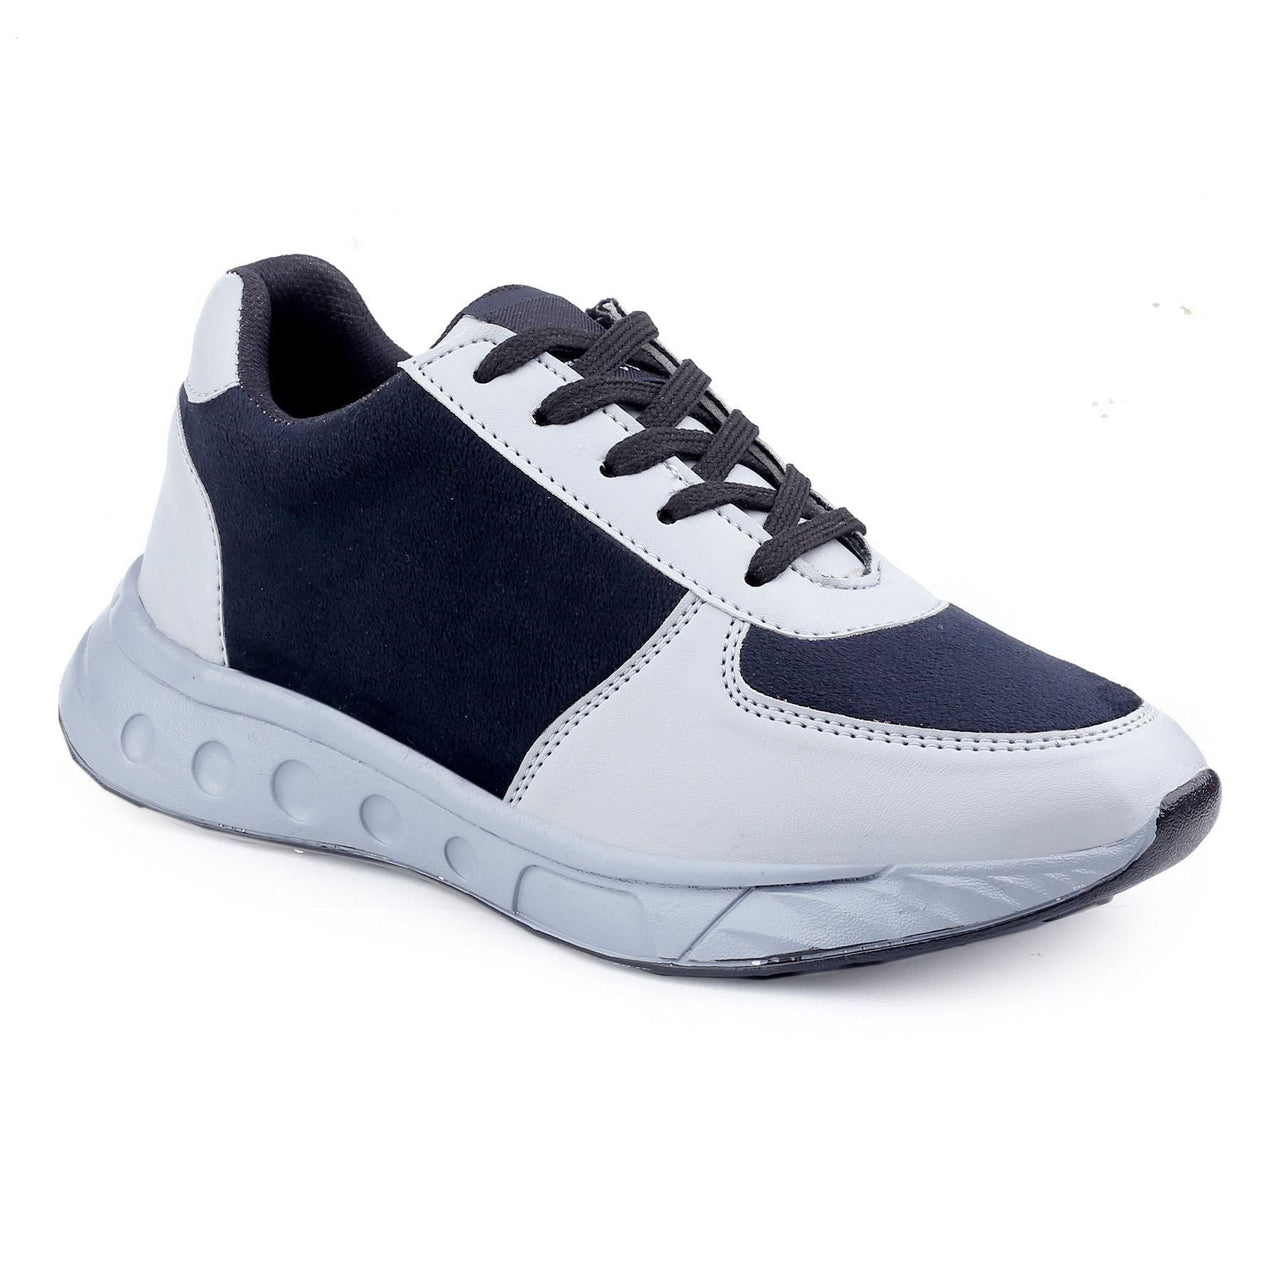 Men's Synthetic Sole Lace Up Casual Shoes